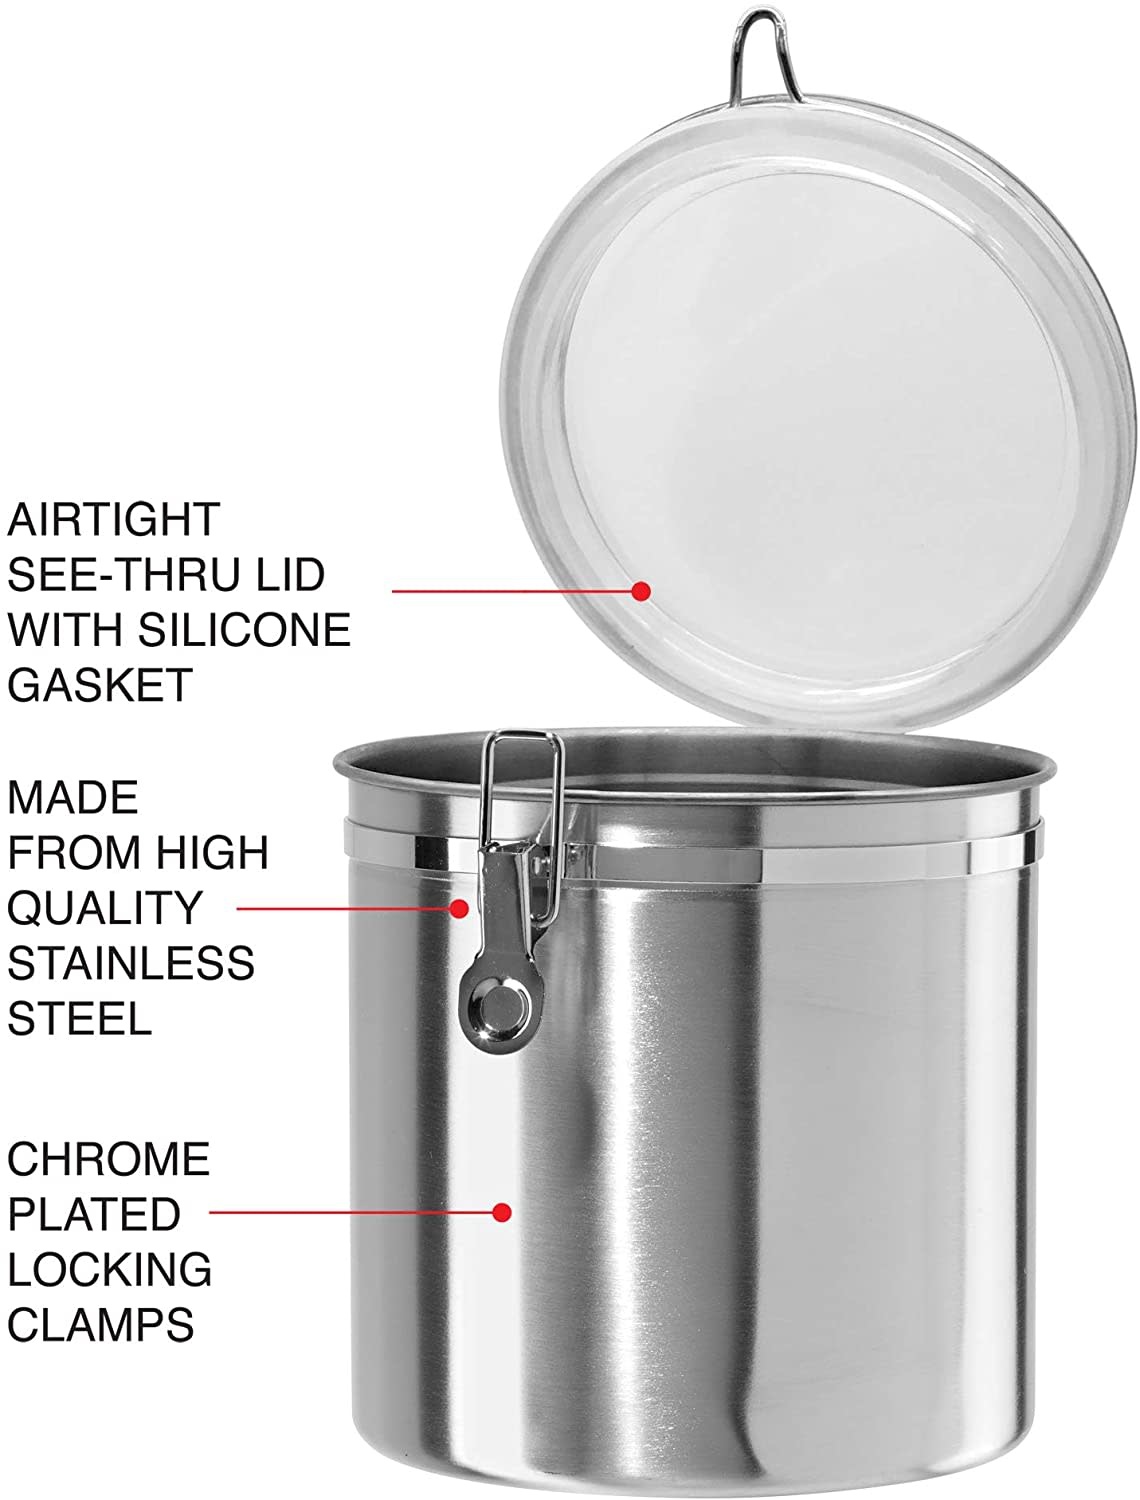 Glass Canisters with Stainless Steel Lids, OGGI